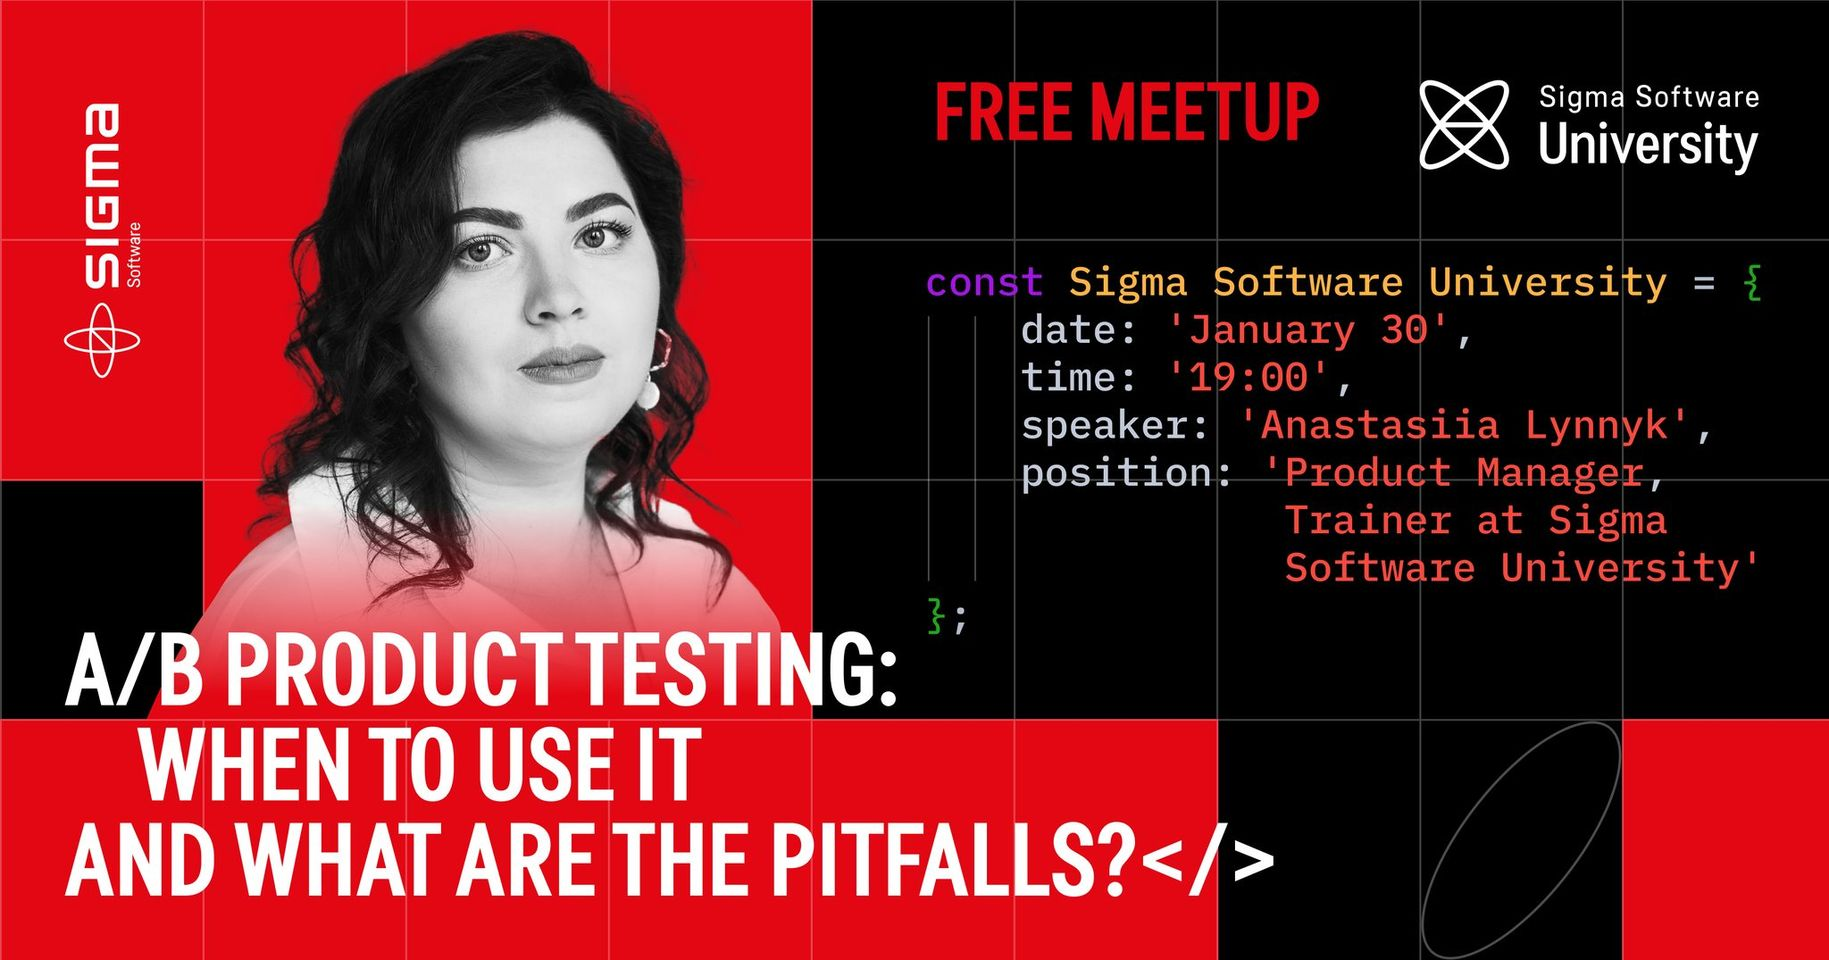 MEETUP: A/B PRODUCT TESTING: WHEN TO USE IT